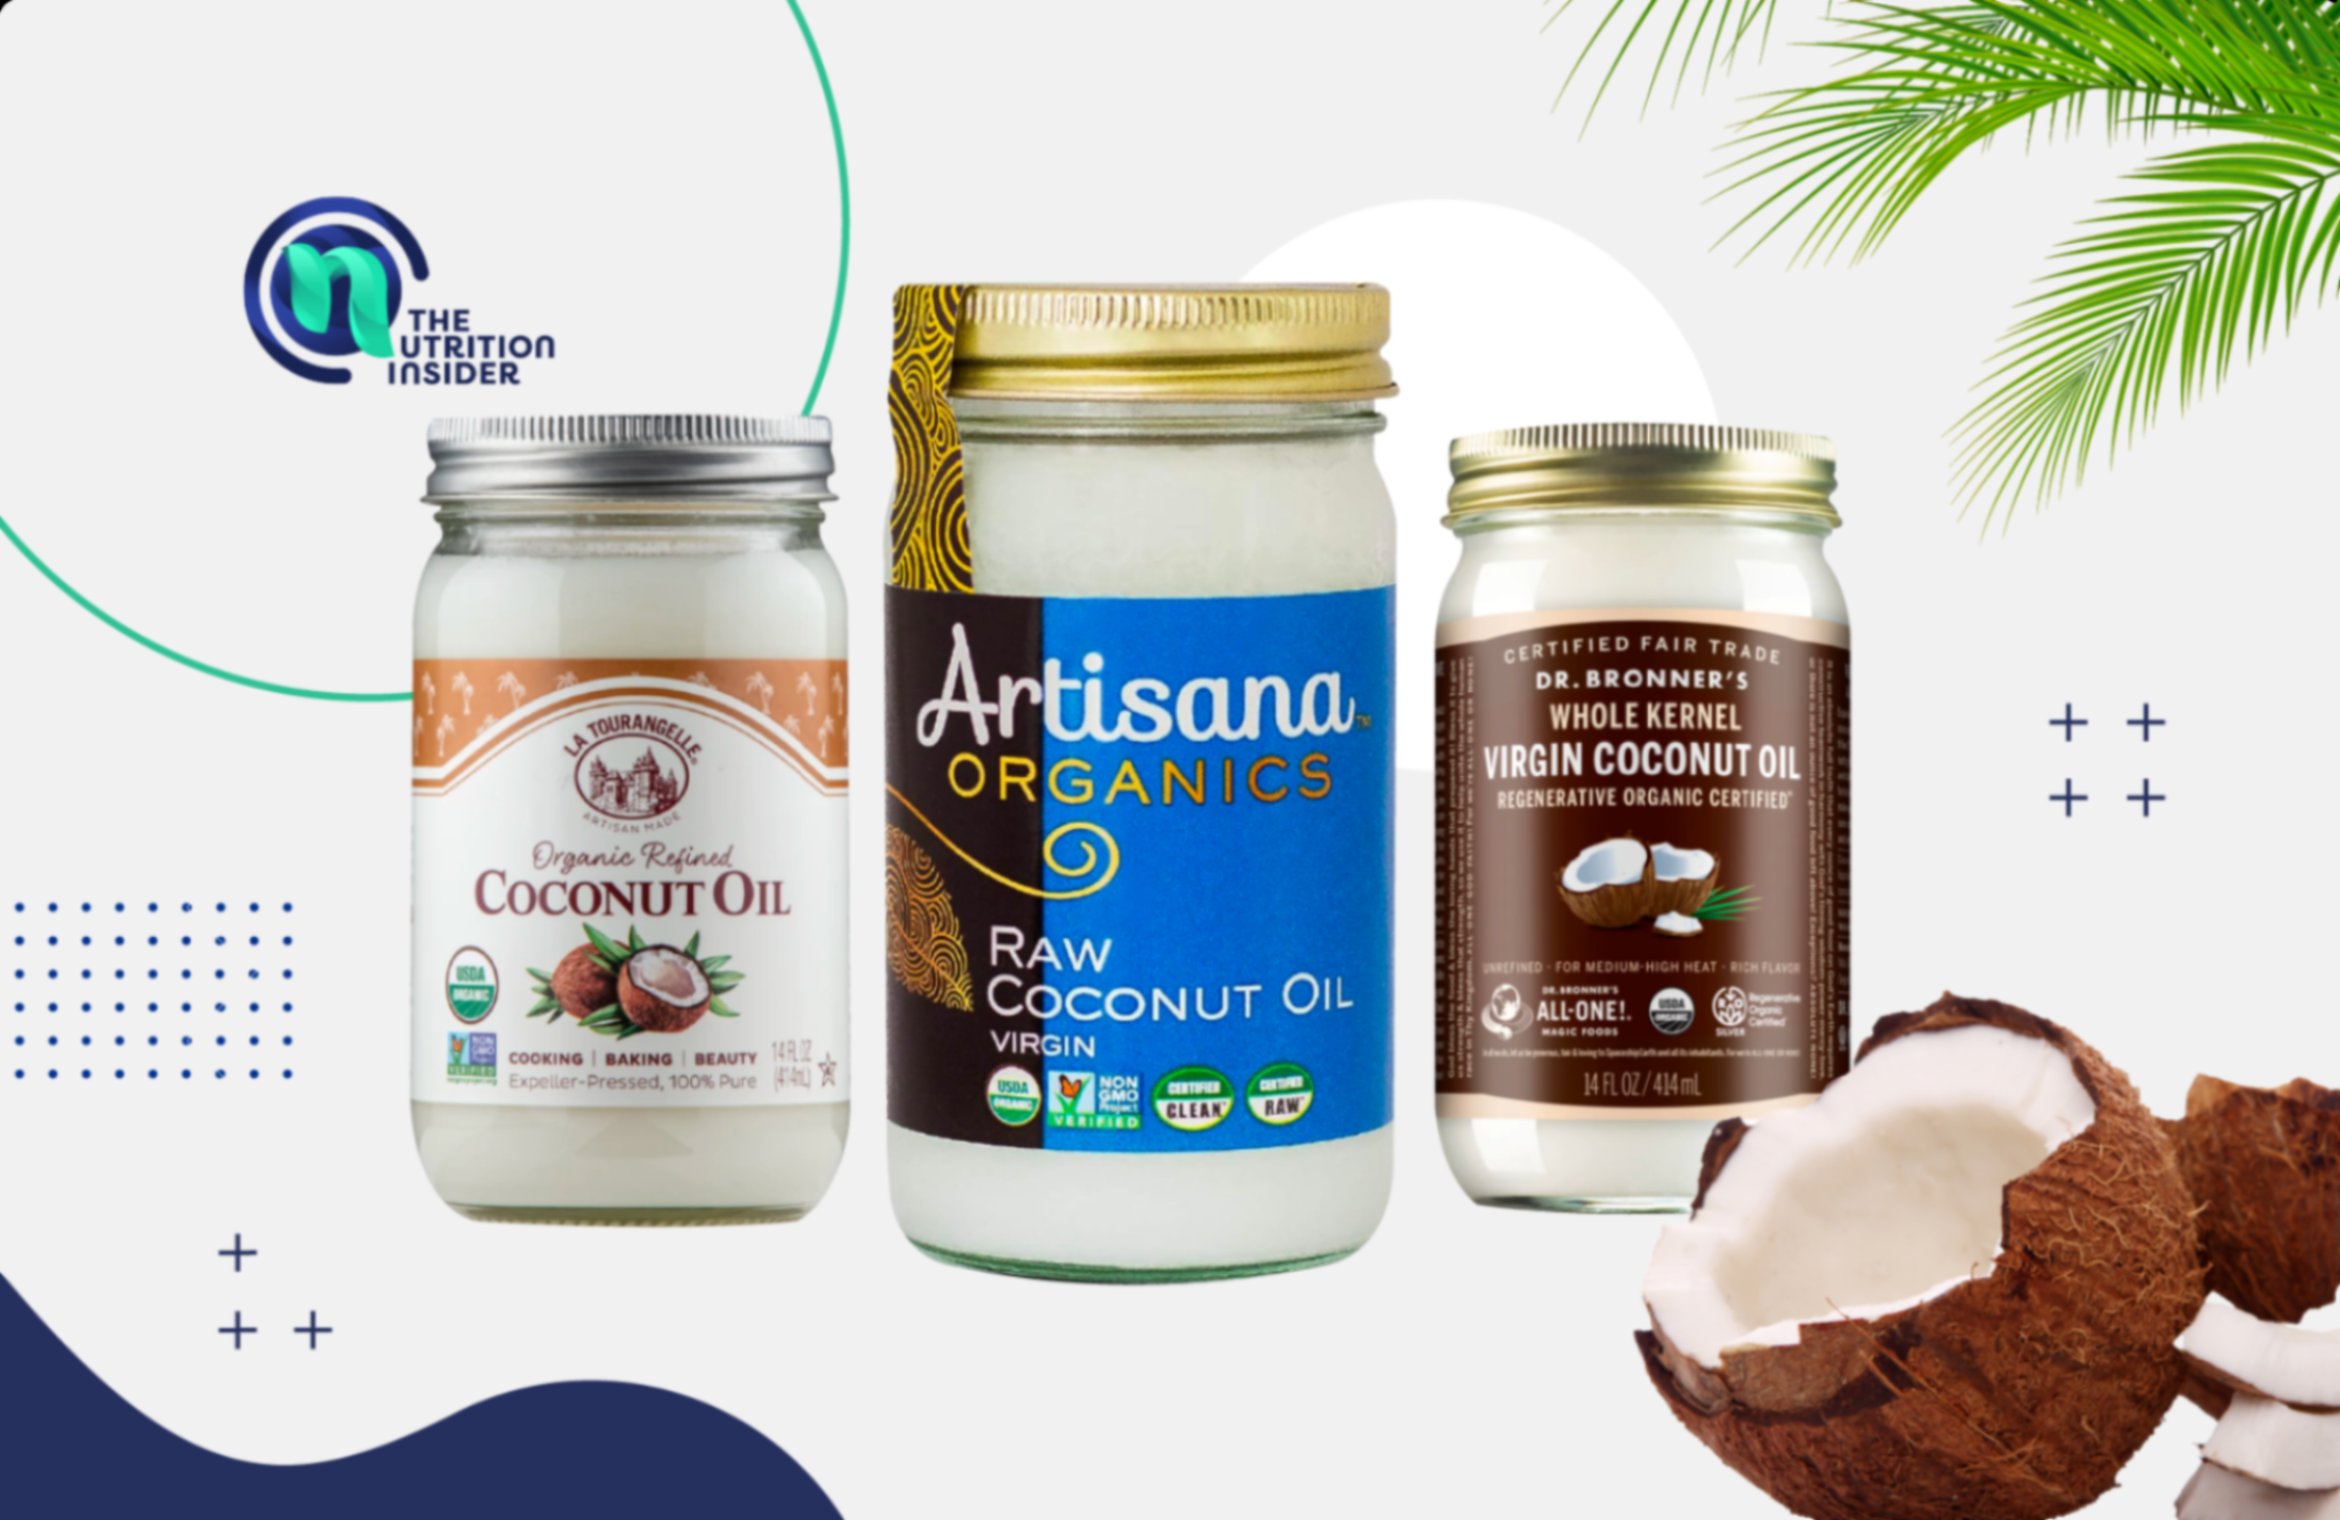 The 7 Best Coconut Oil Brands for Cooking, Baking, Beauty, and More